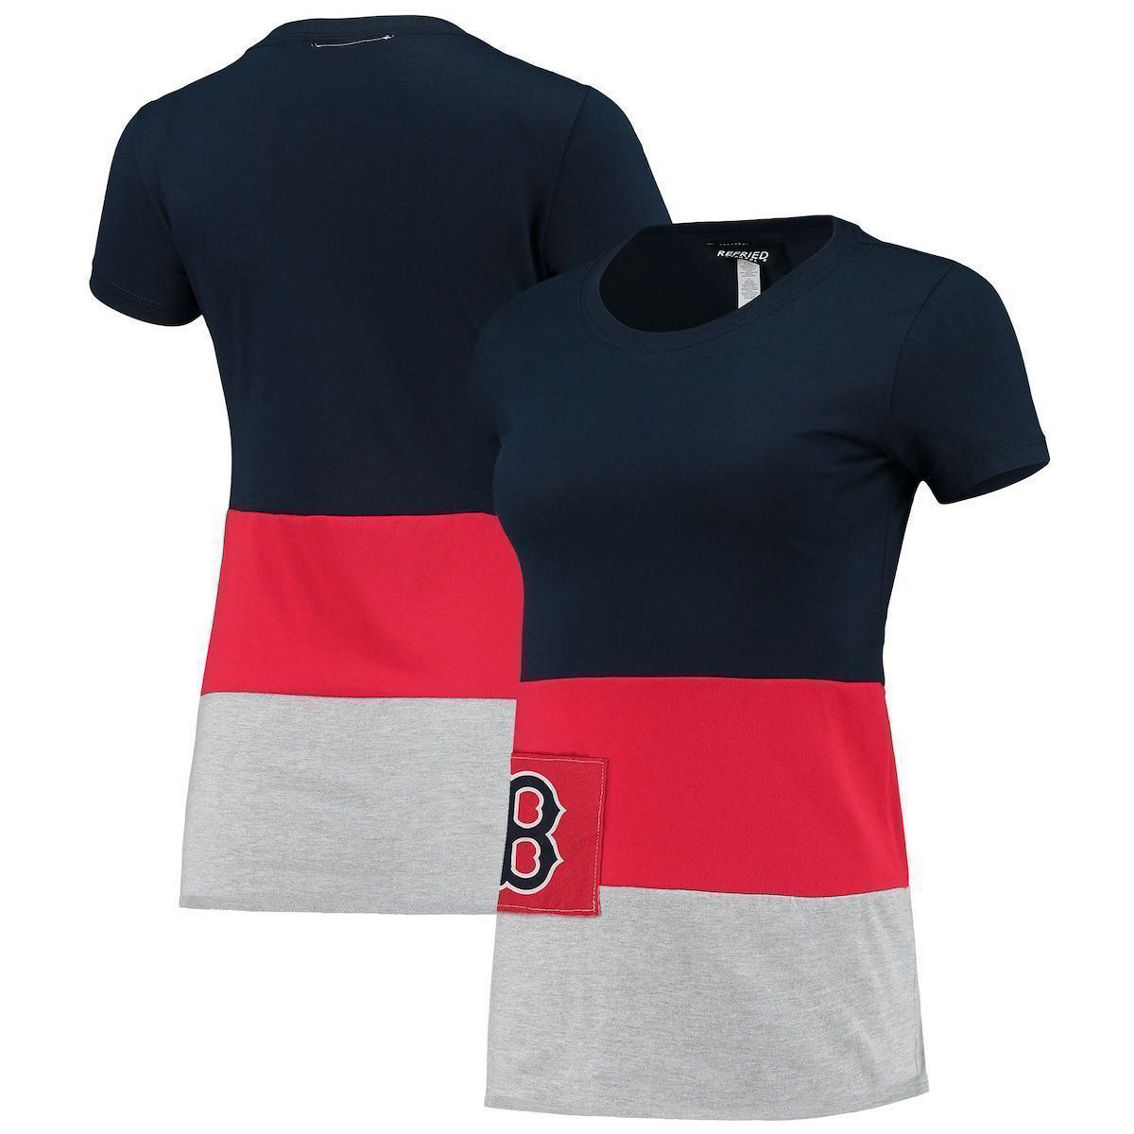 Refried Apparel Women's Navy Boston Red Sox Sustainable Fitted T-shirt, Fan Shop